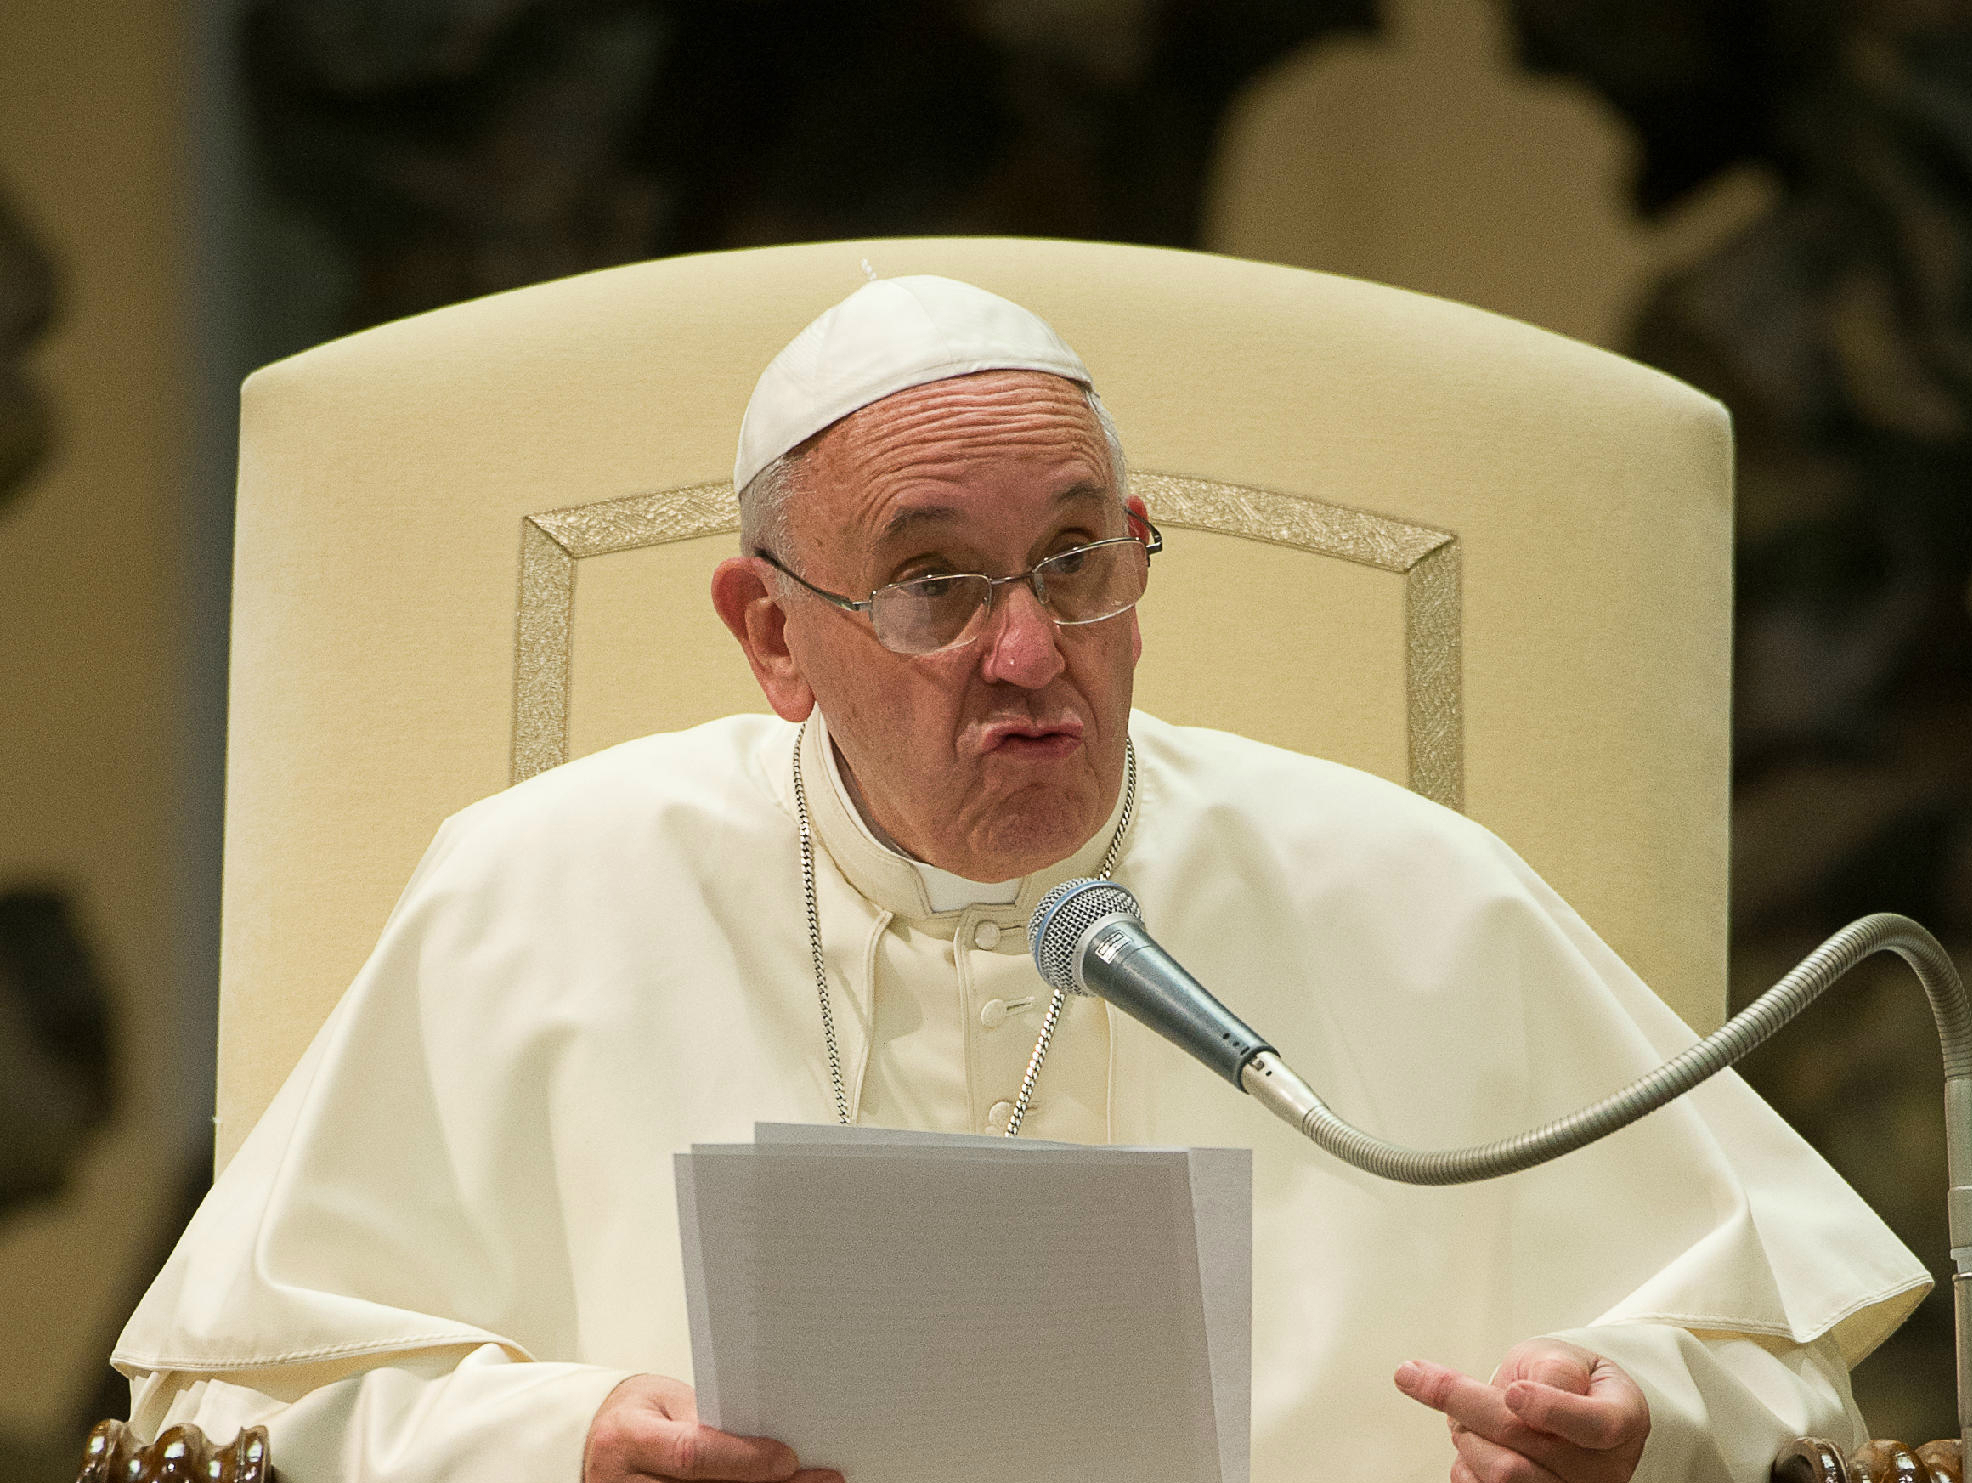 Pope Francis during the General audience of Wednesday 19th of August 2015